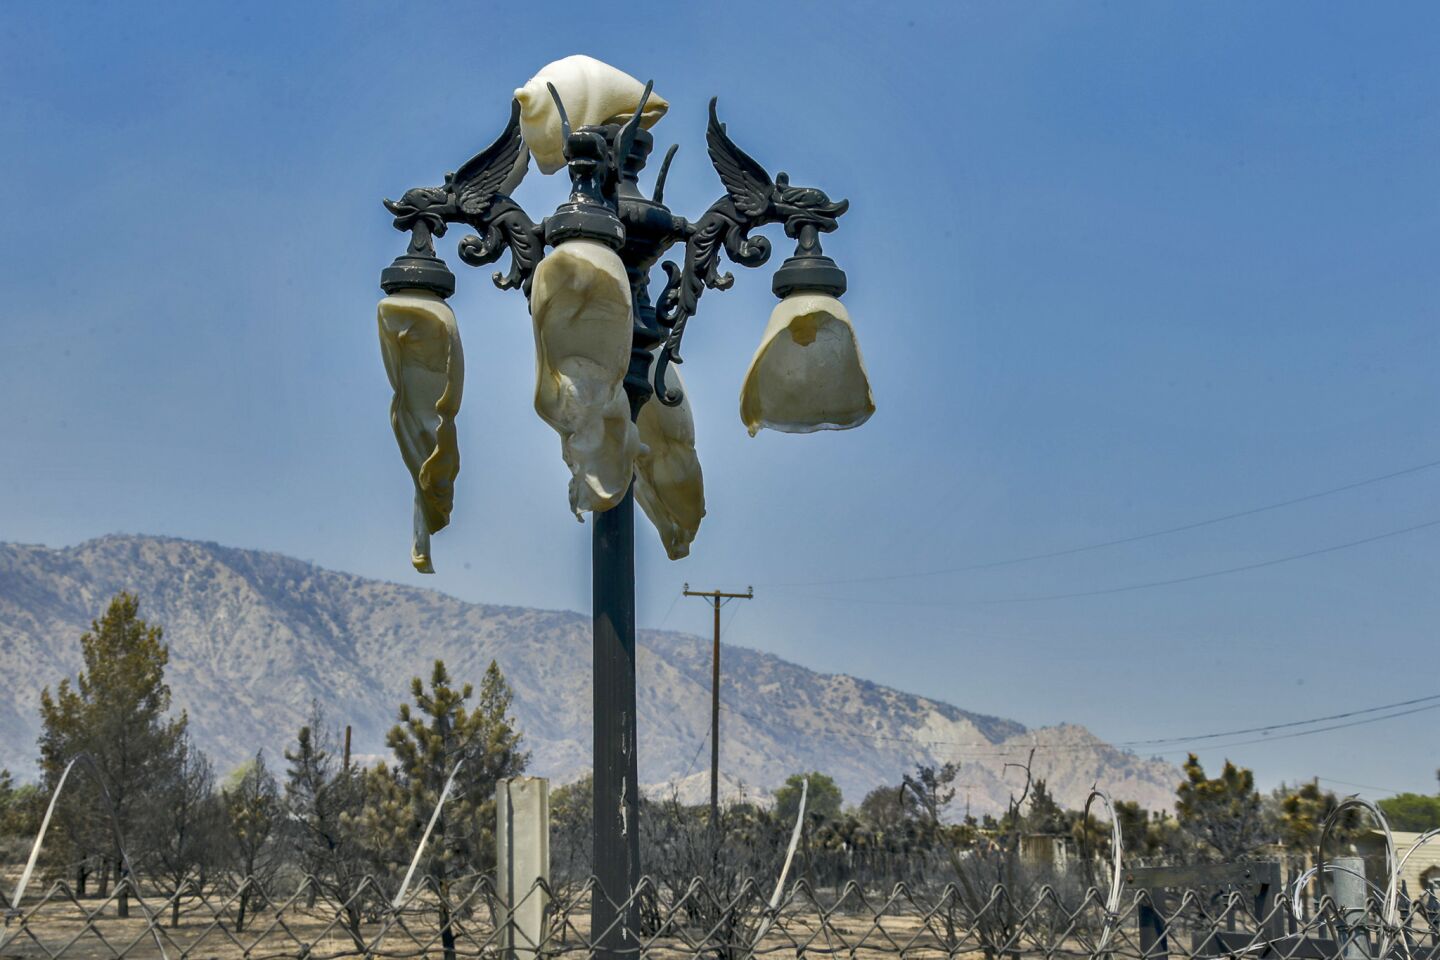 A light pole with plastic globes melted in the heat of the Blue Cut fire stands along Tamarind Avenue in Phelan.